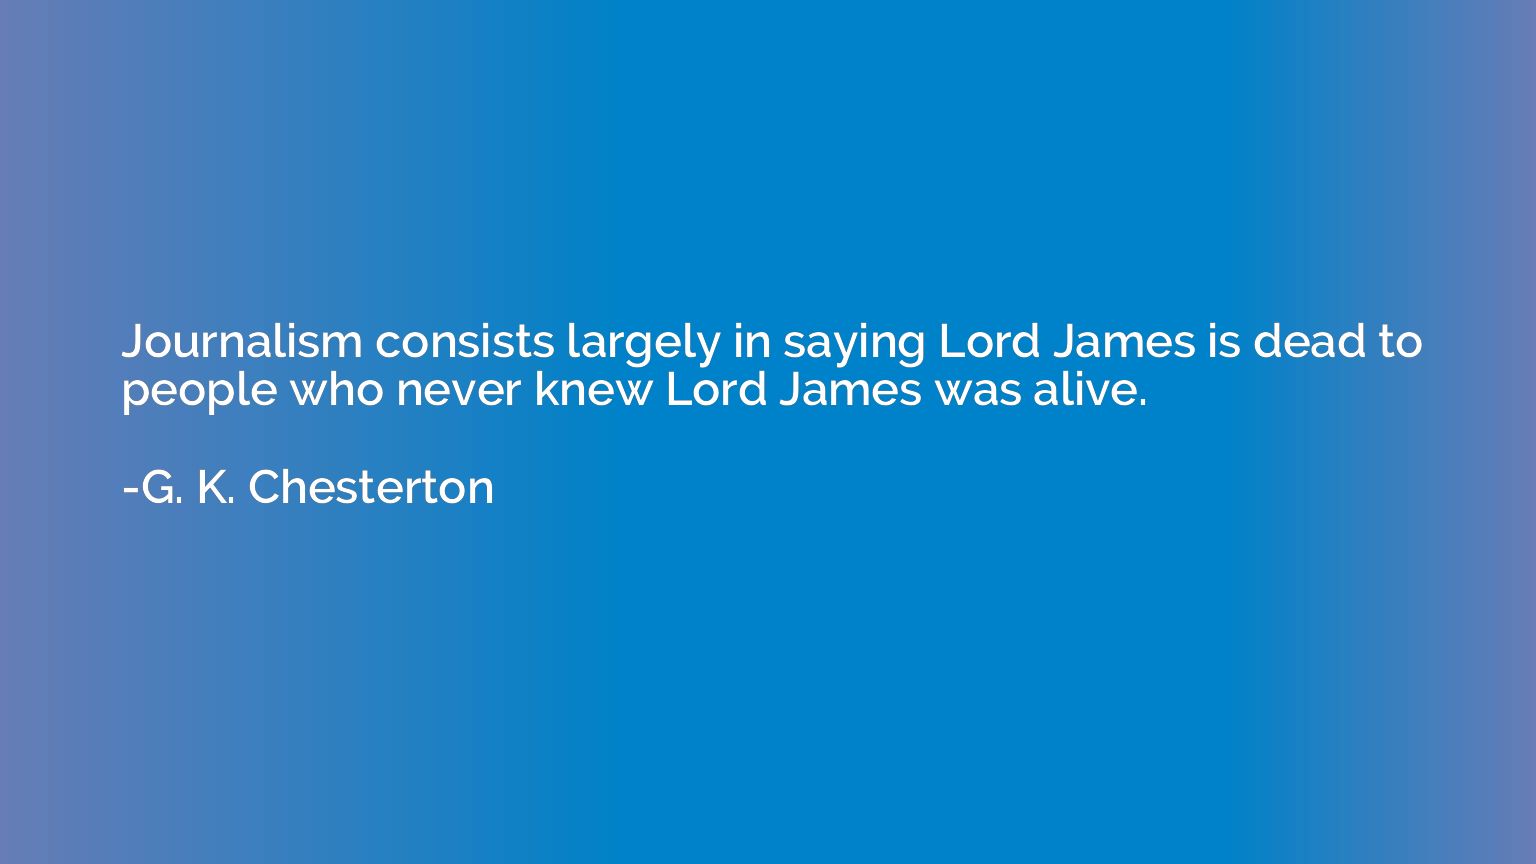 Journalism consists largely in saying Lord James is dead to 